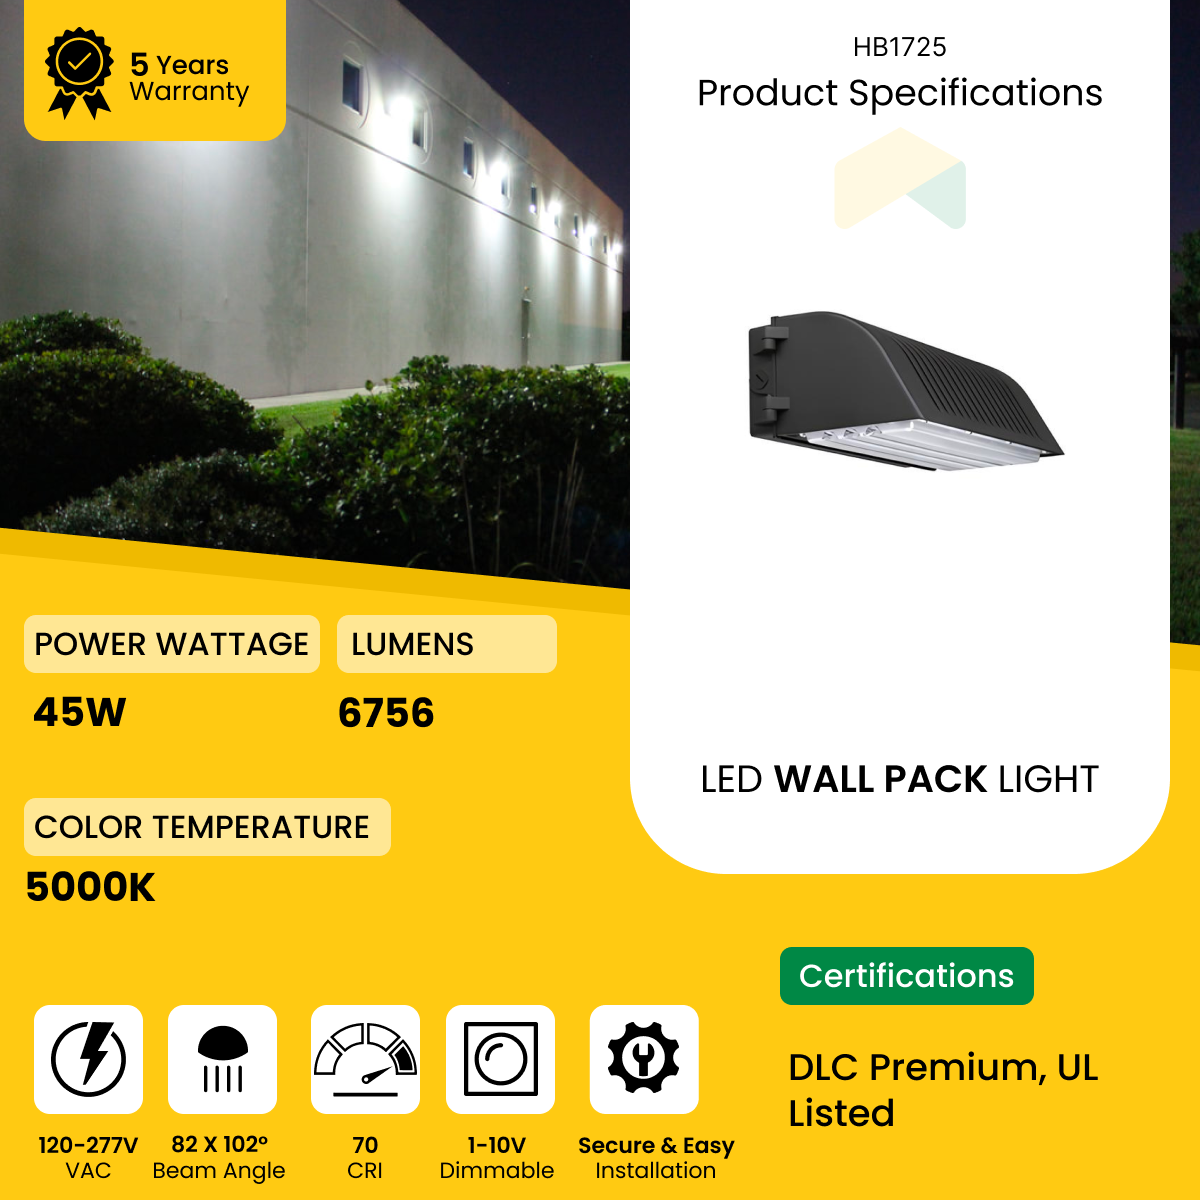 LED Full Cutoff Wall Pack Light 45W - 5000K -  6756 Lumens - AC120-277V  0-10V Dimmable - IP66 - UL Listed - DLC Premium Listed - 5 Years Warranty